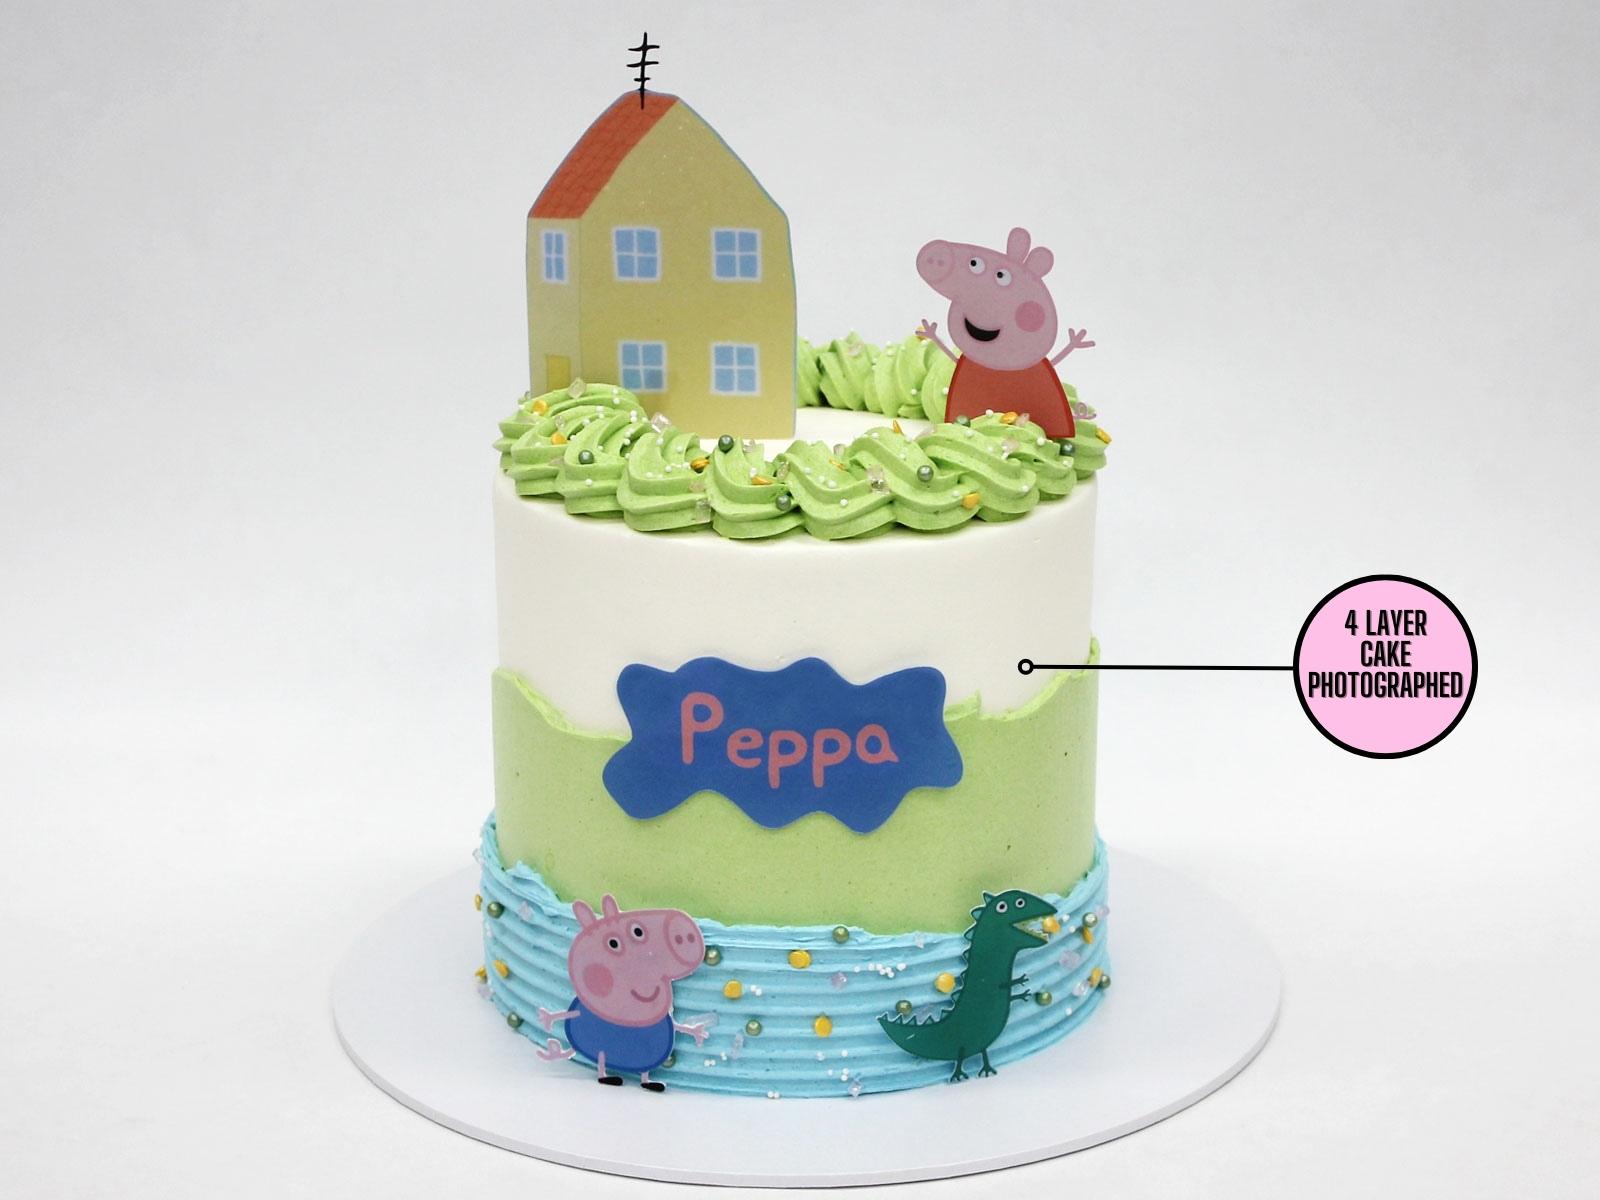 Peppa Pig Cake - Buy Online, Free UK Delivery — New Cakes